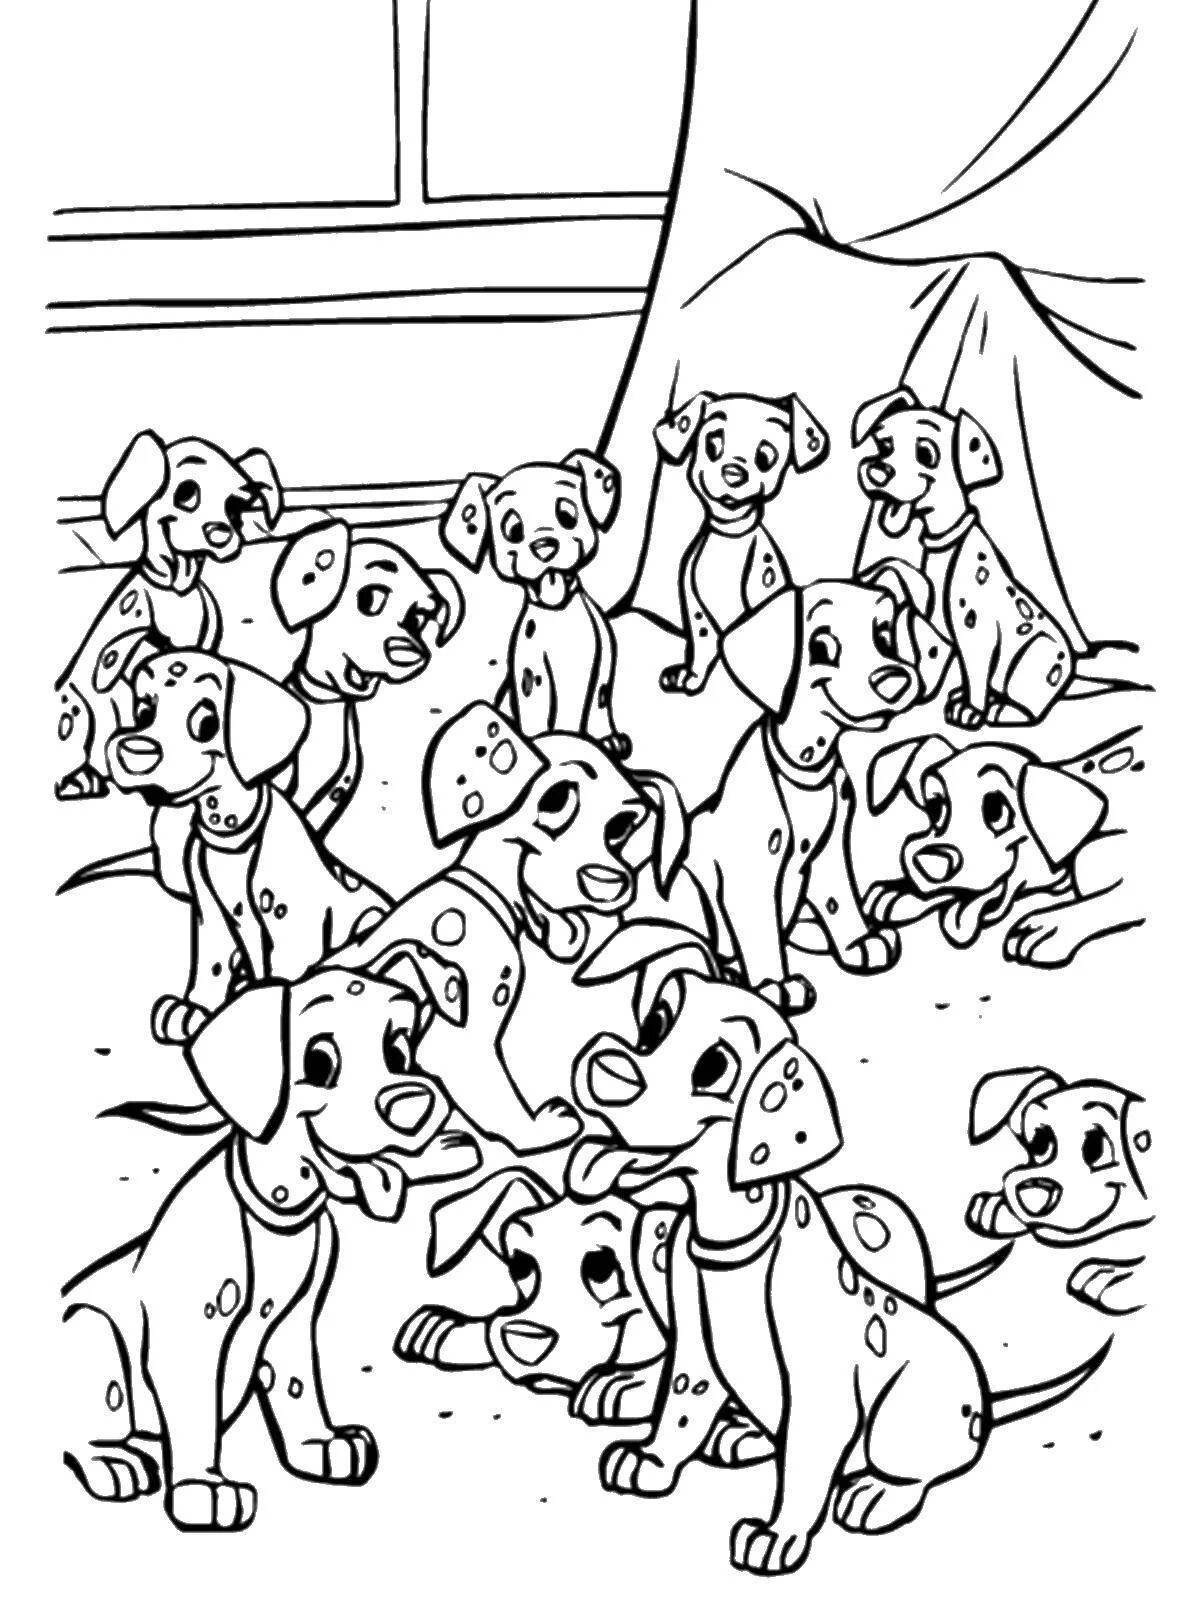 Bright family coloring of dogs